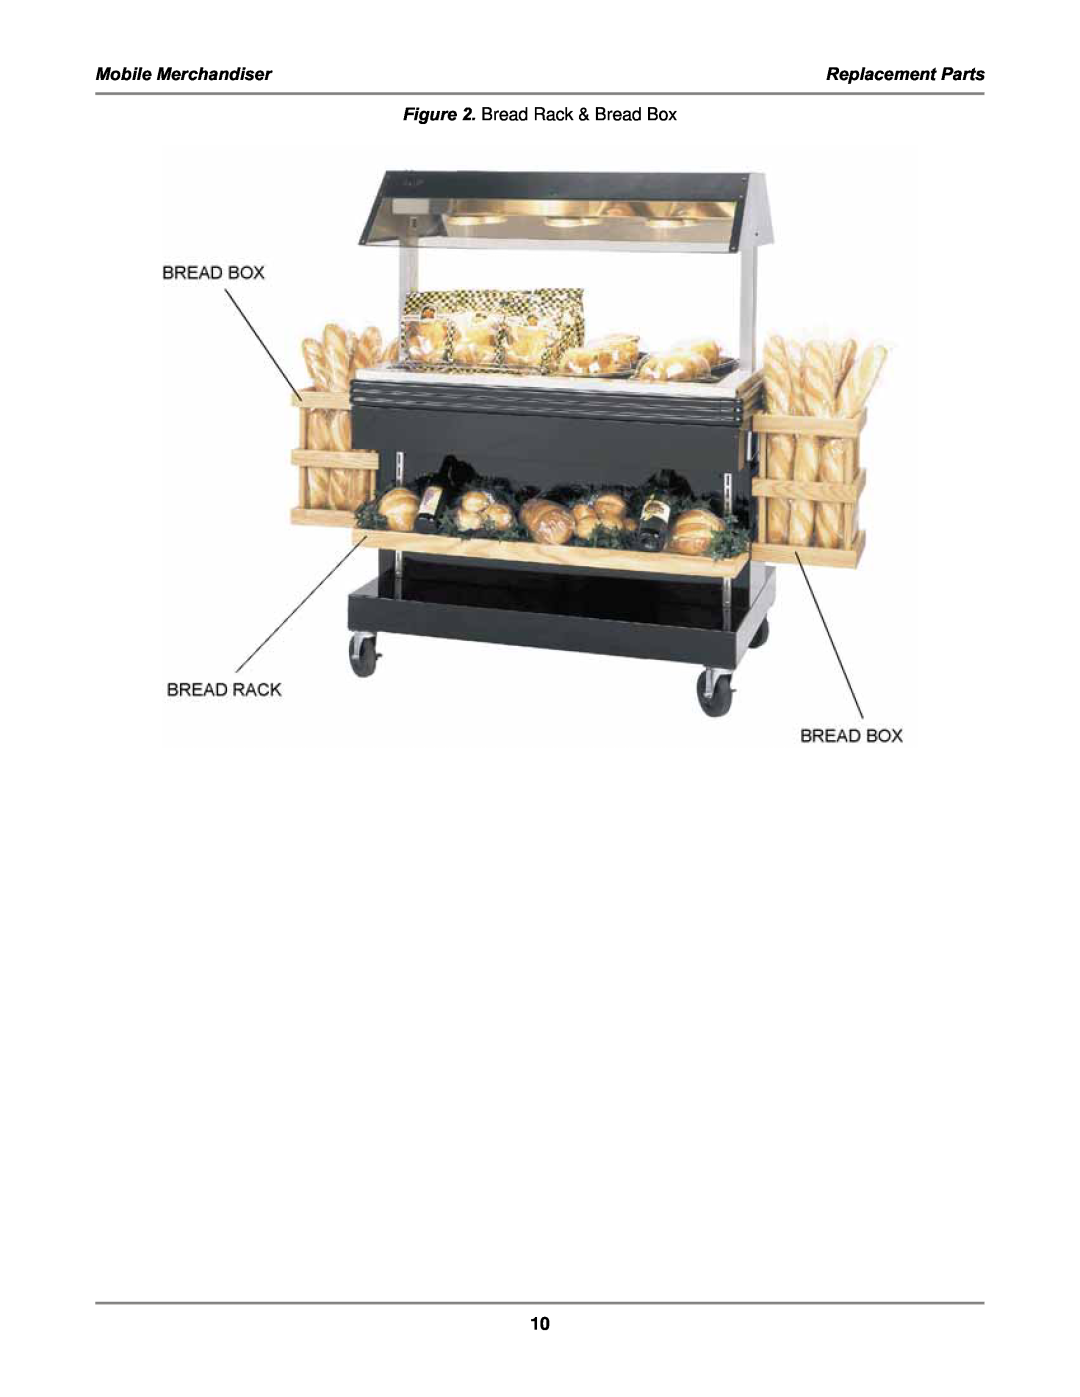 Bakers Pride Oven MM4, MM6 service manual Mobile Merchandiser, Replacement Parts, Bread Rack & Bread Box 